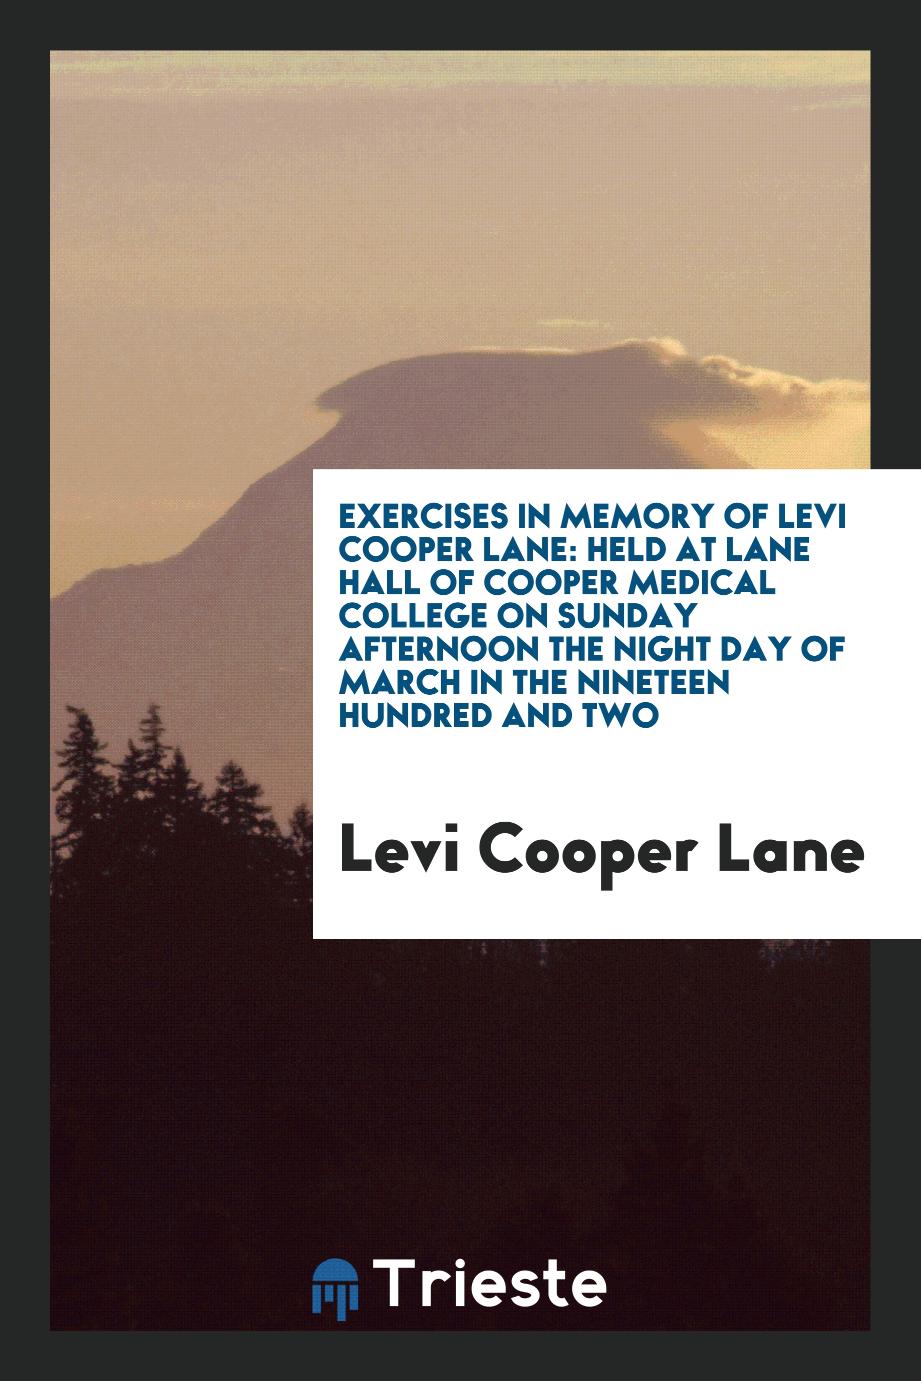 Exercises in memory of Levi Cooper Lane: Held at Lane Hall of Cooper Medical College on Sunday afternoon the night day of March in the nineteen hundred and two